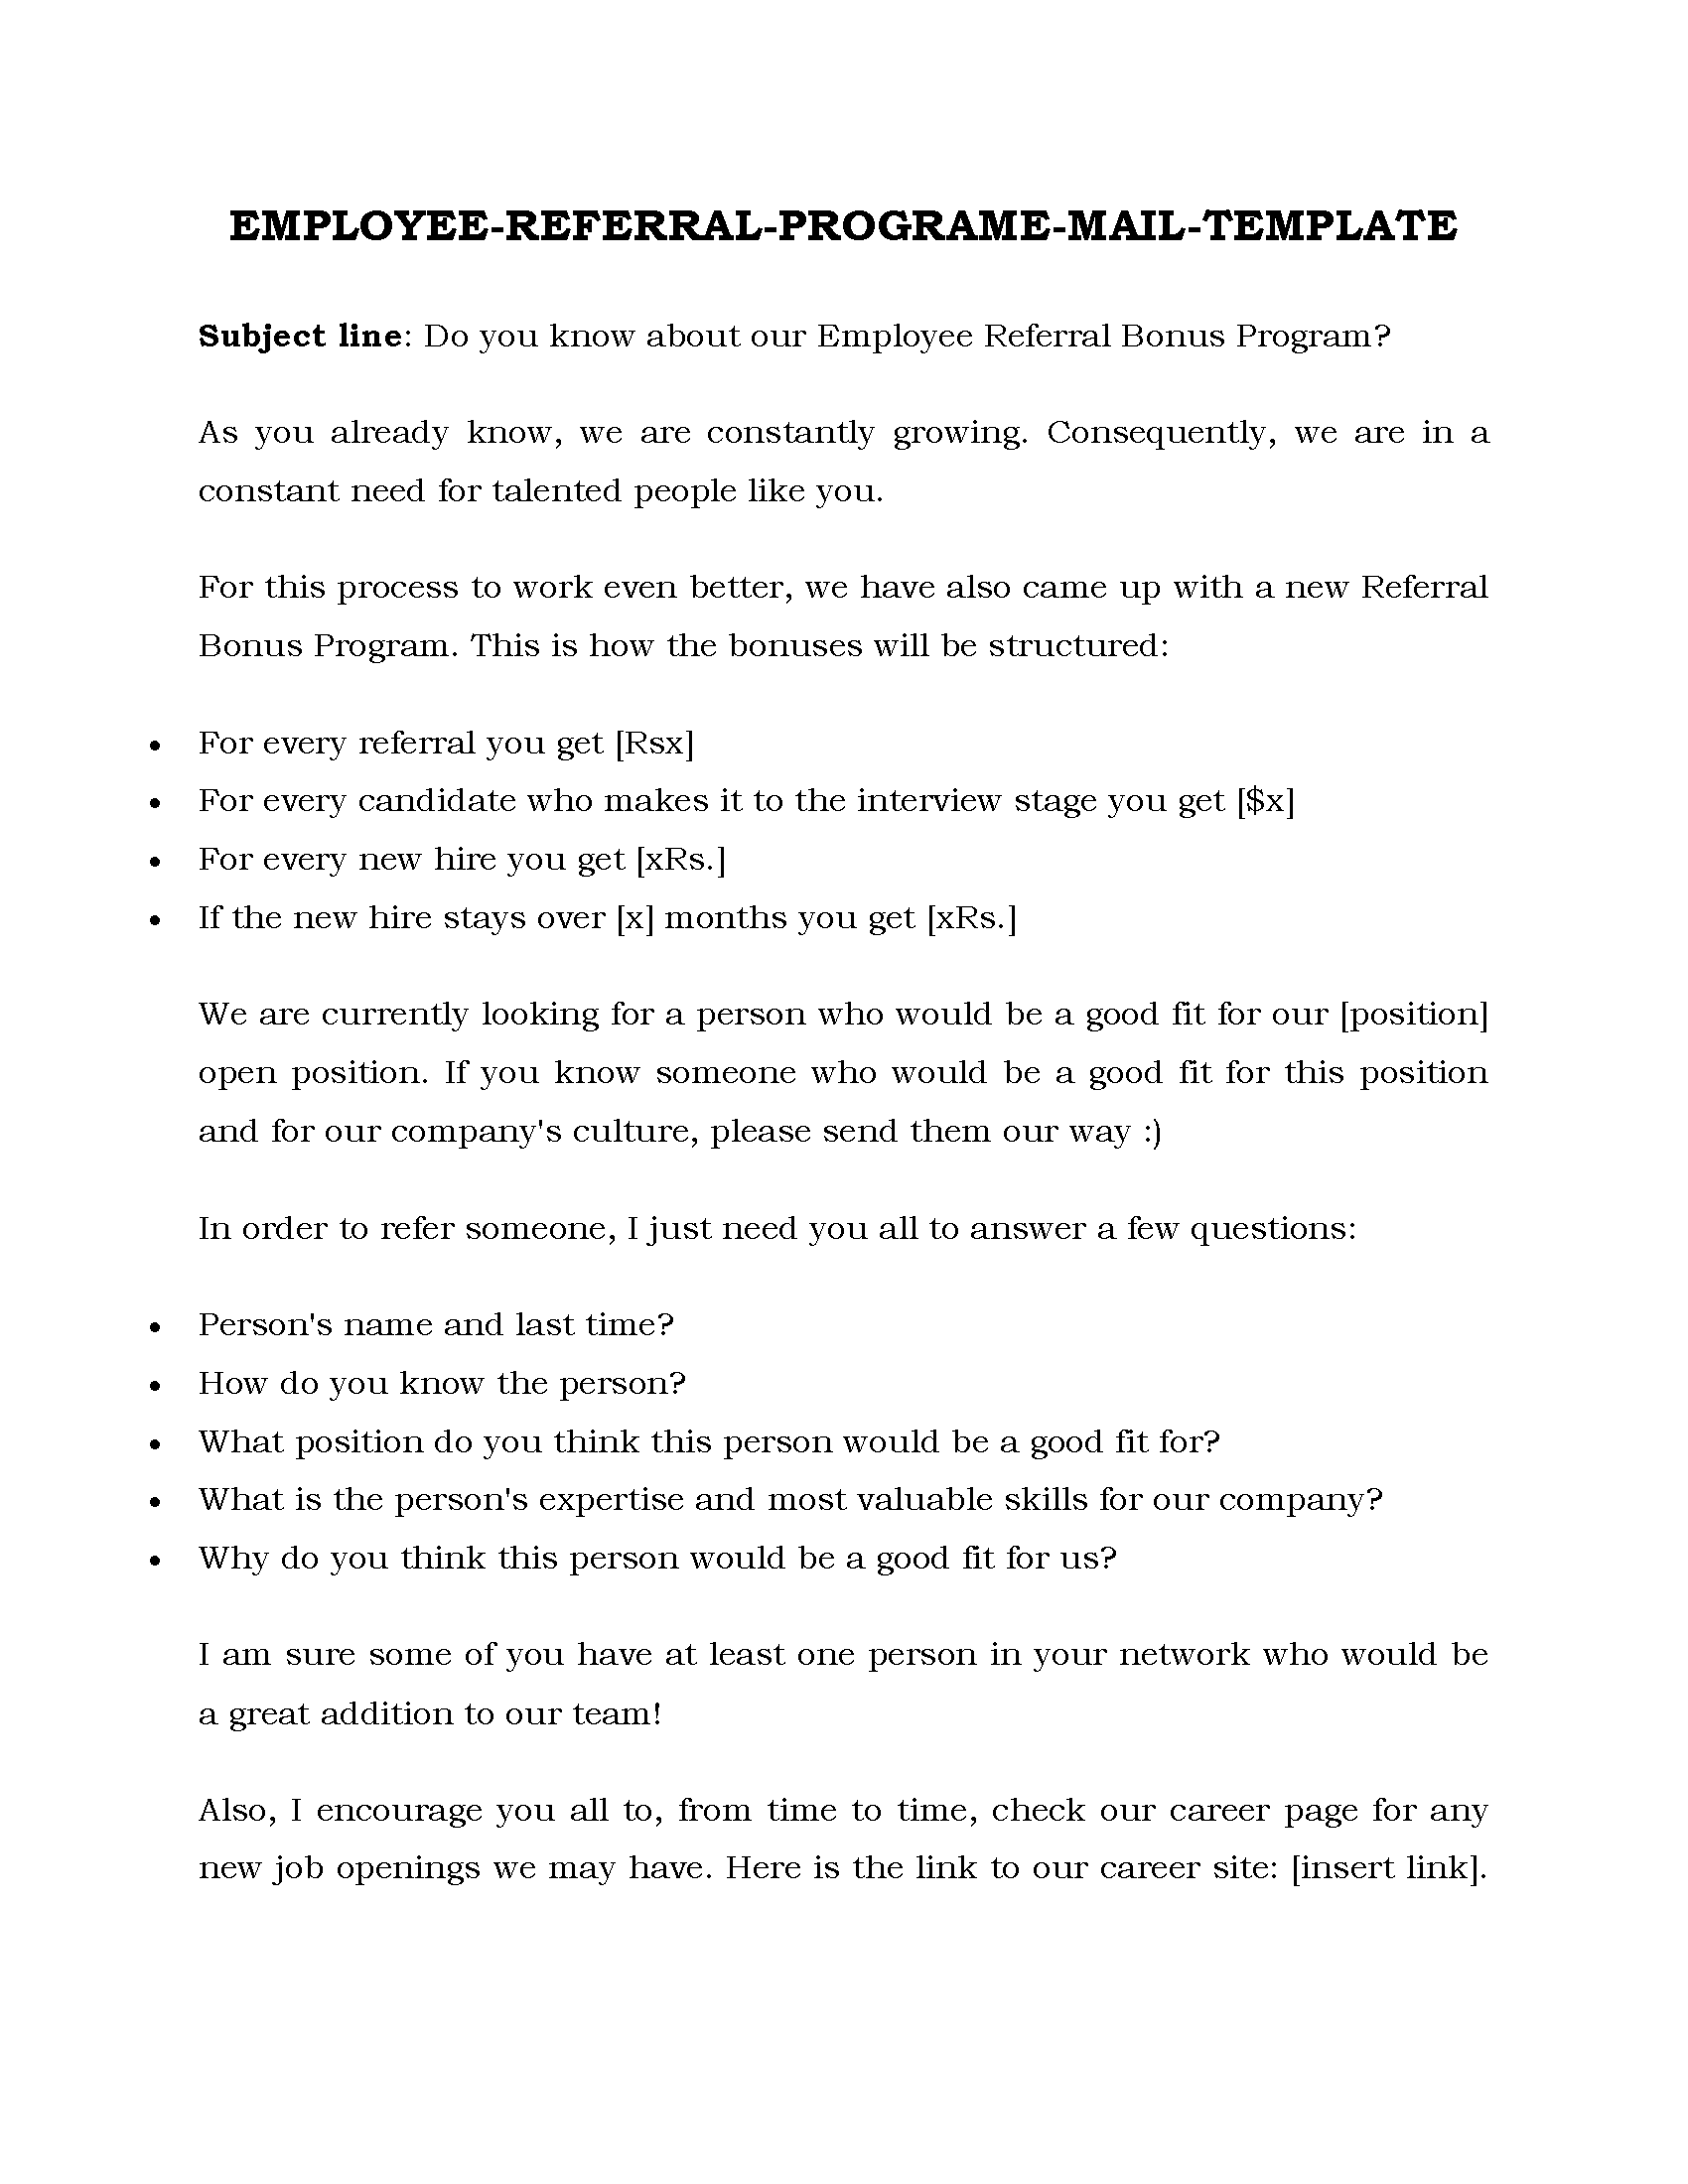 02- employee-referral-programe-mail-template